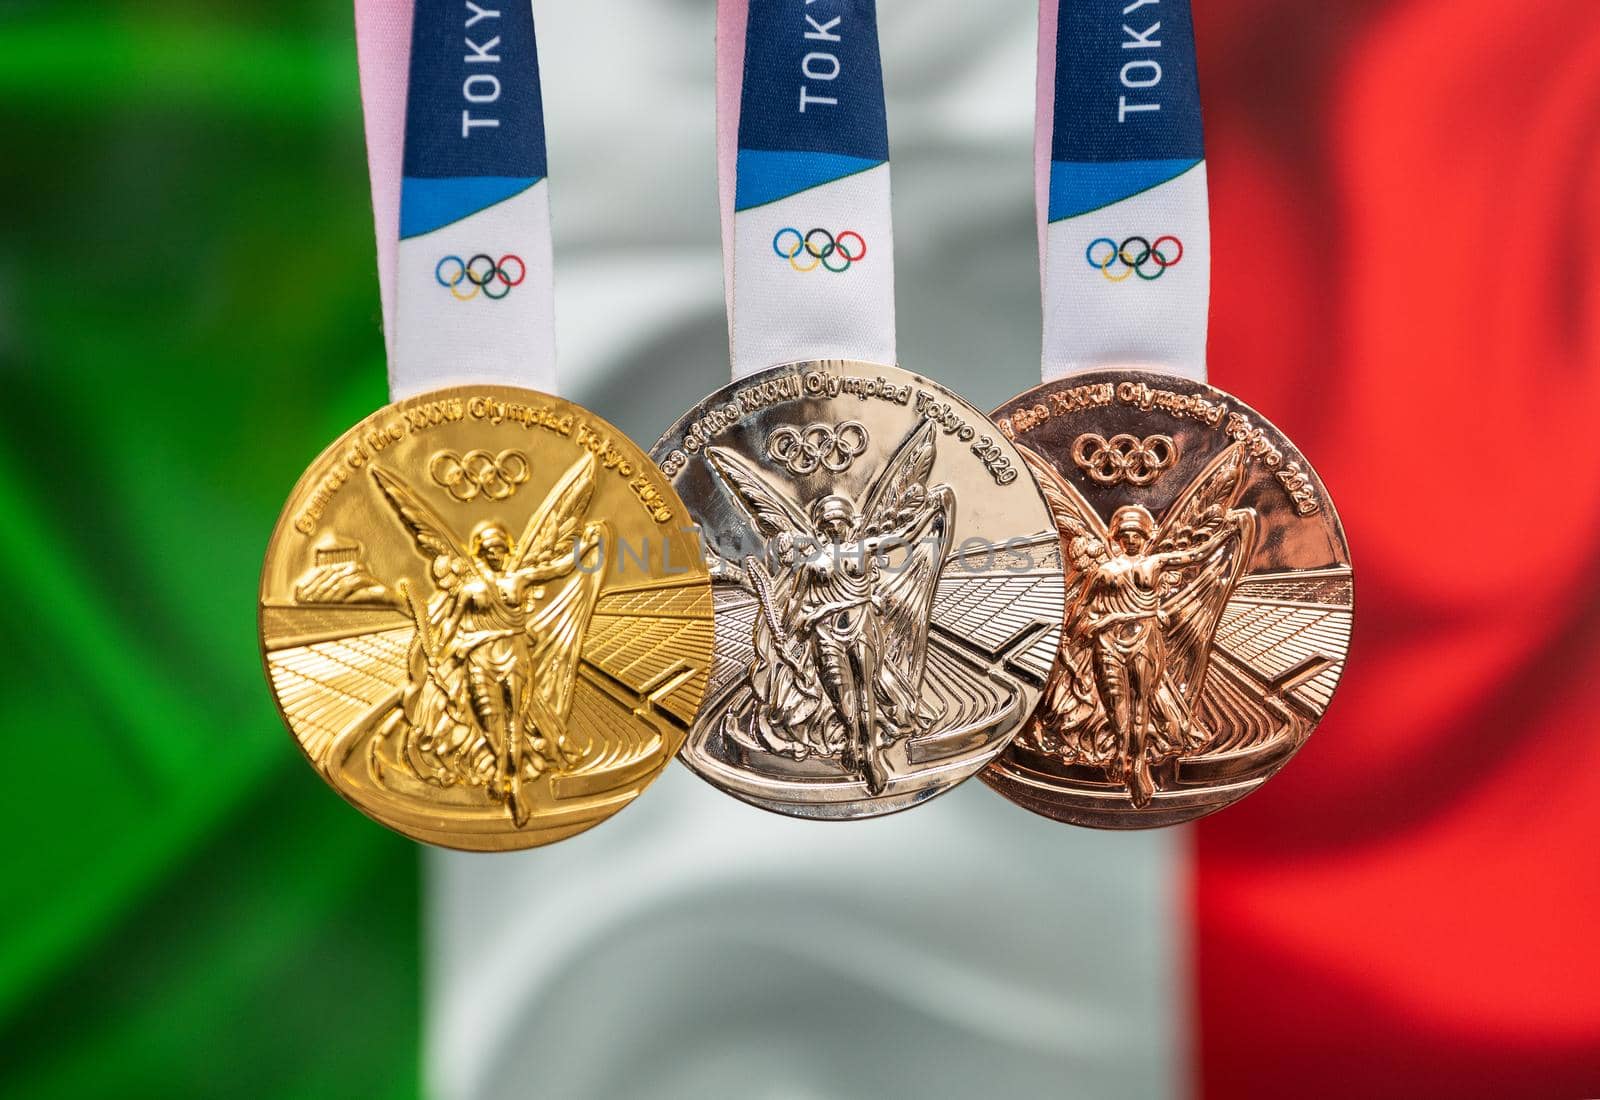 April 25, 2021 Tokyo, Japan. Gold, silver and bronze medals of the XXXII Summer Olympic Games 2020 in Tokyo on the background of the flag of Italy.